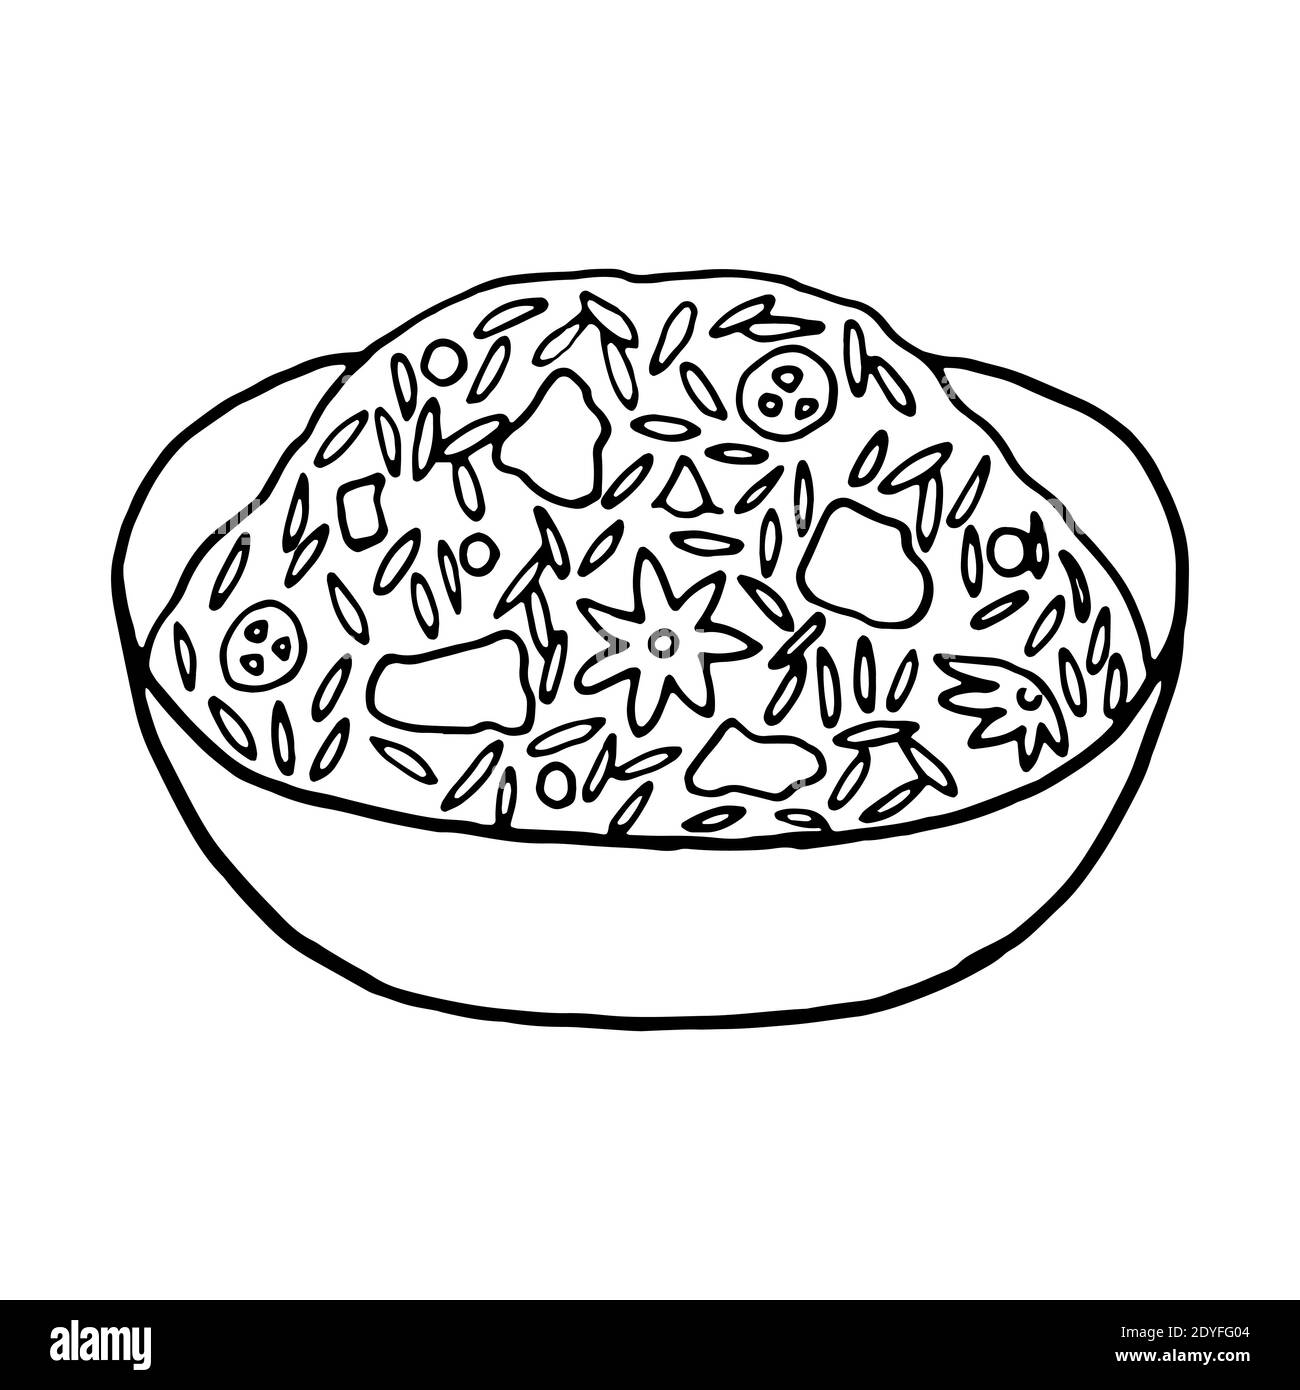 Vector hand drawn doodle biryani. Indian cuisine dish. Design sketch element for menu cafe, restaurant, label and packaging. Illustration on a white b Stock Vector